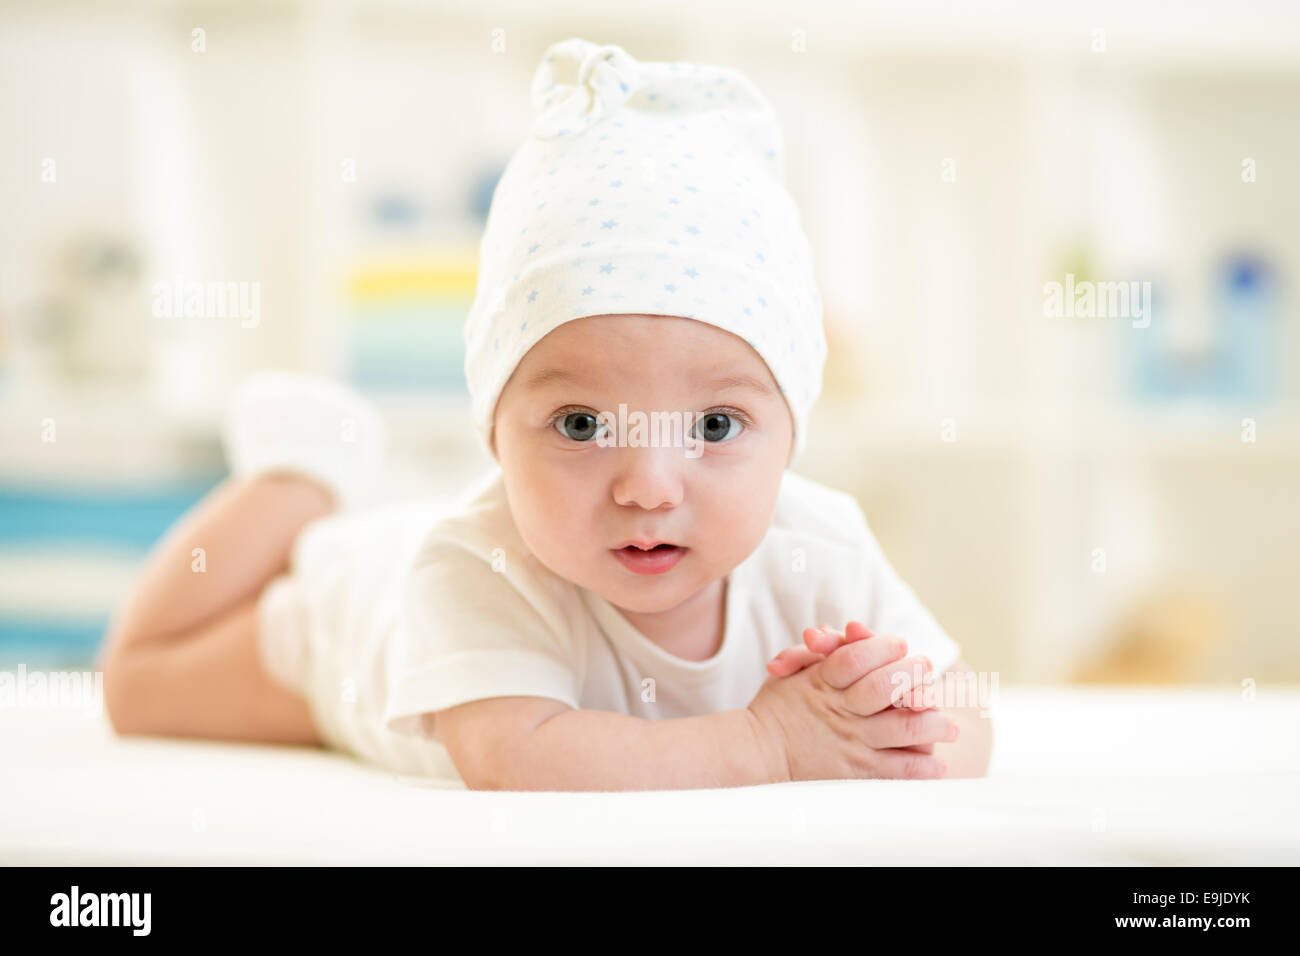 portrait of smiling baby at home Stock Photo